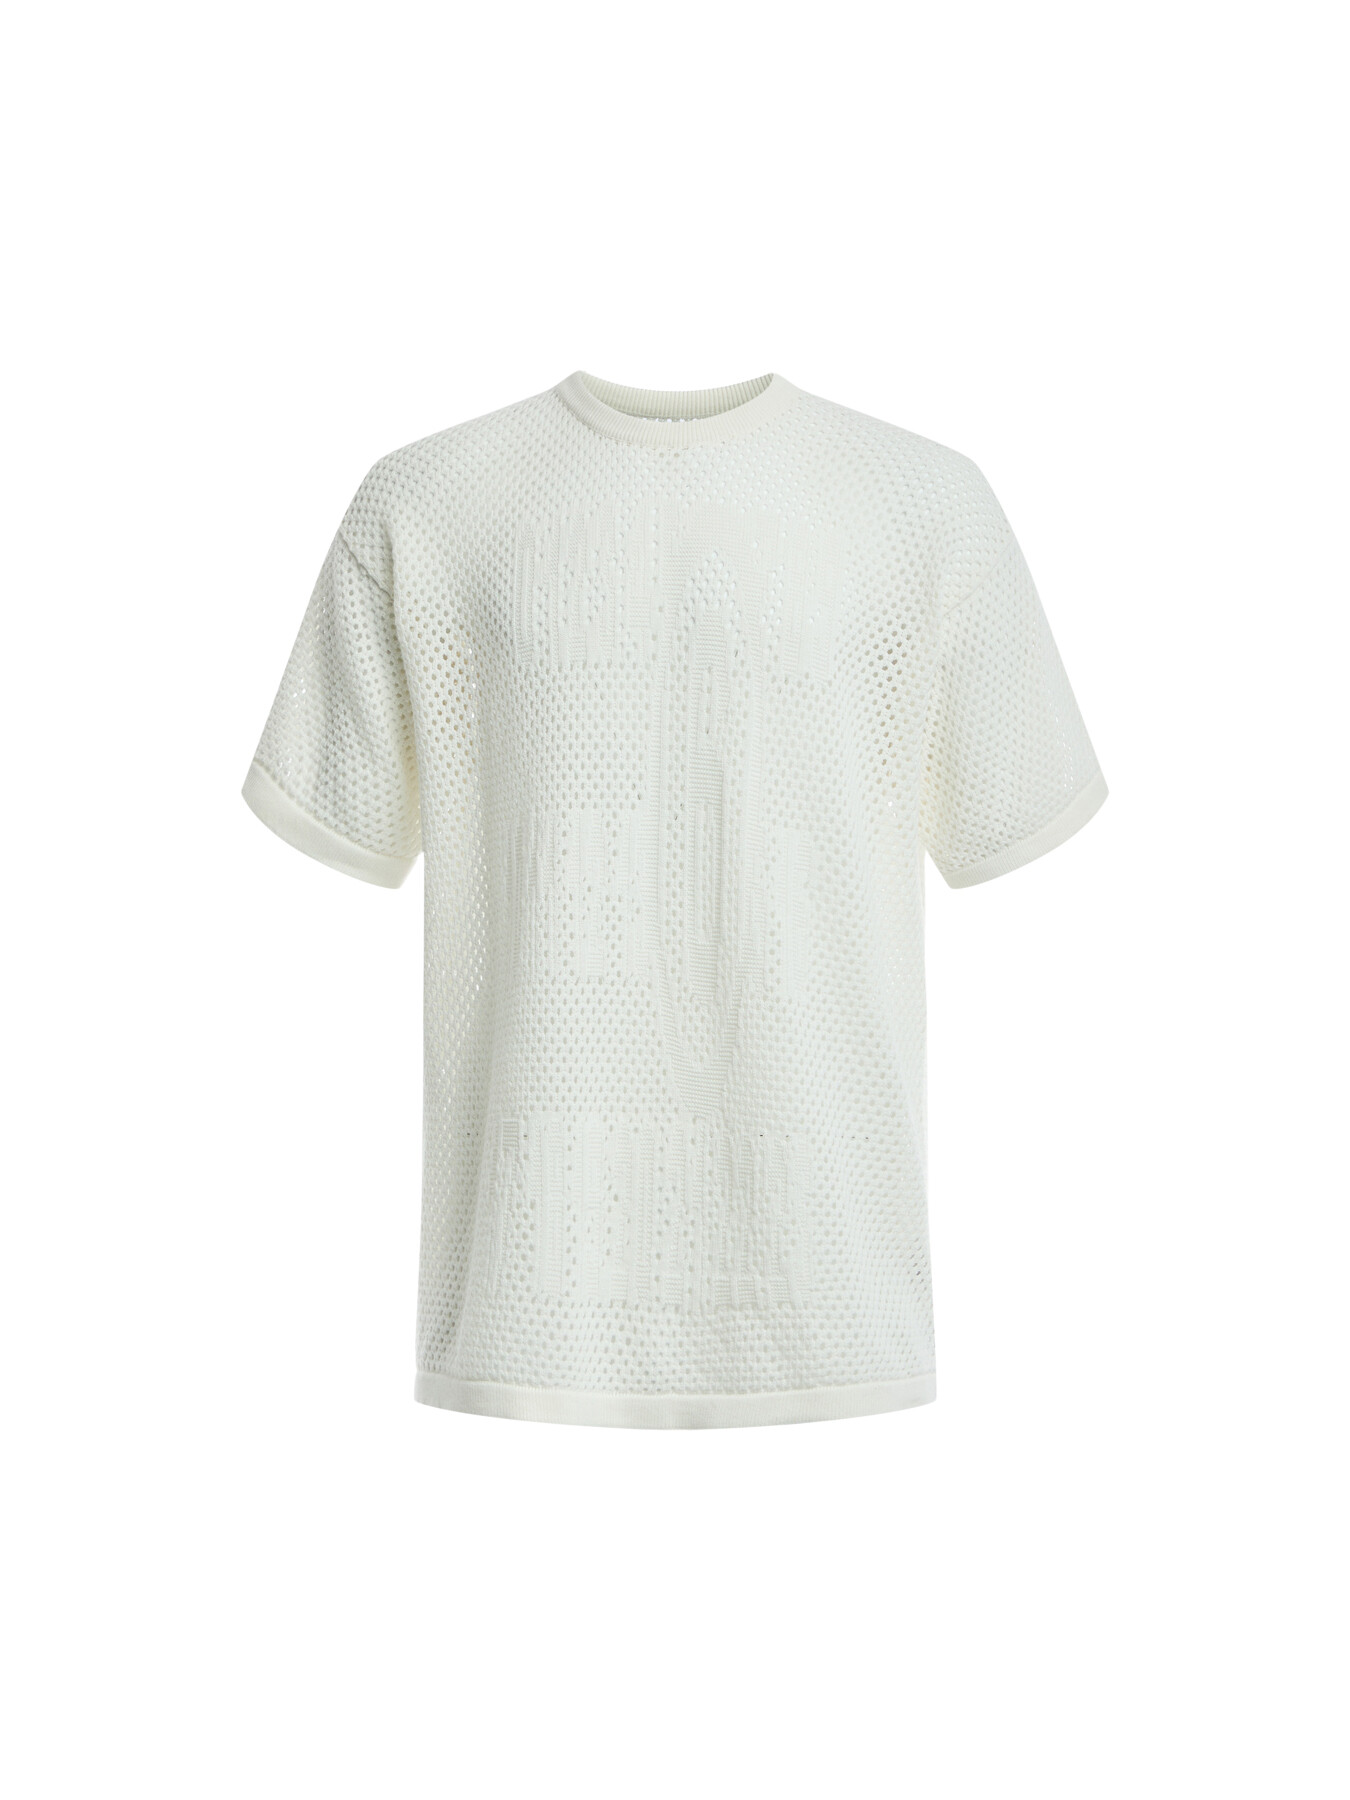 Mm6 Maison Margiela Men's Stretched Number T-shirt In White